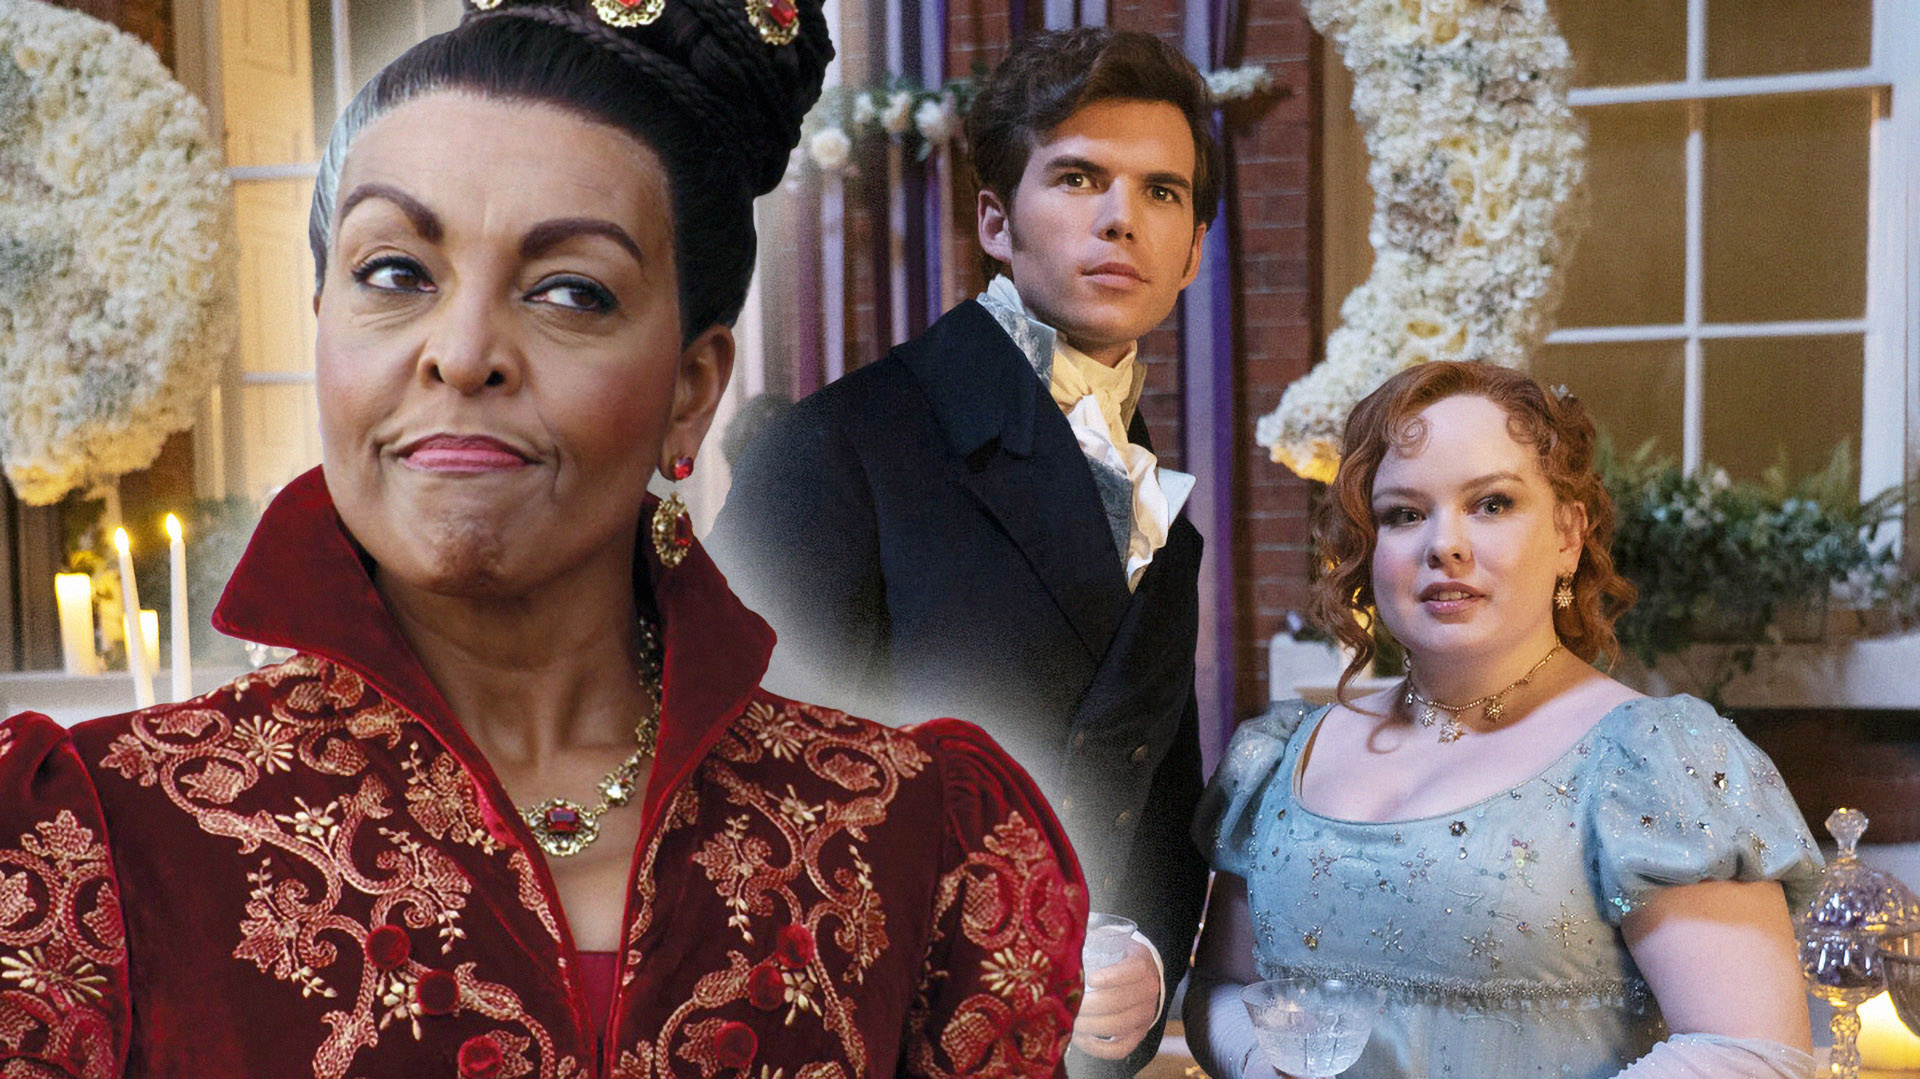 Bridgerton Cast vs Characters: 5 Shocking Age Differences That Will Ruin the Show for You